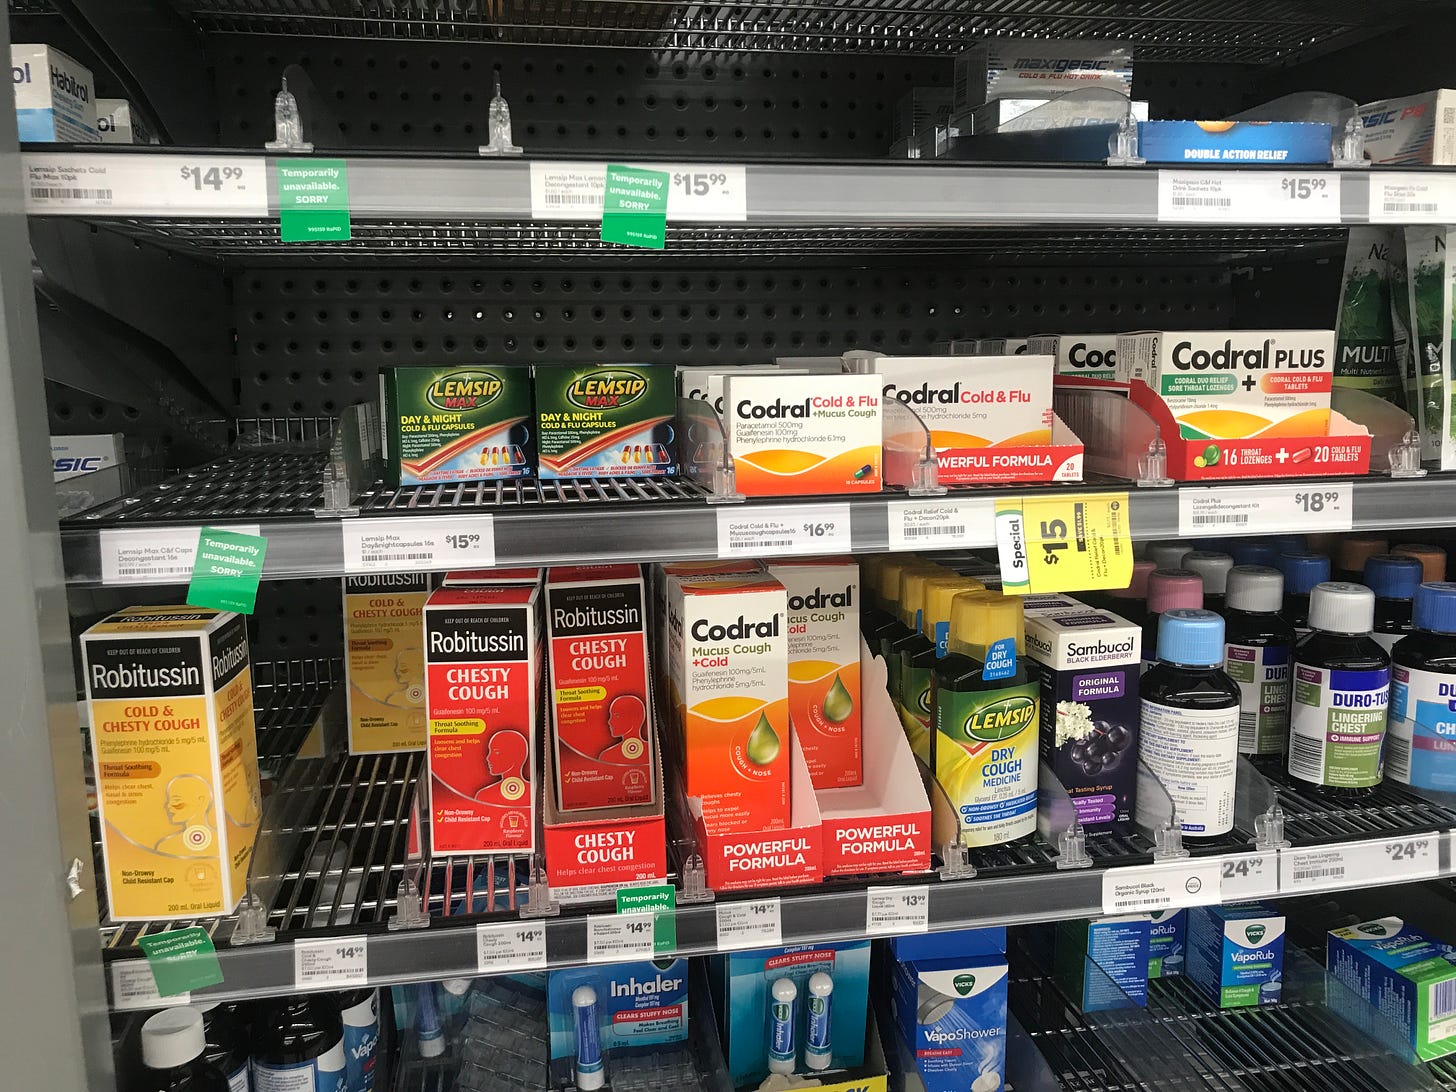 Half-empty shelves at the supermarket in the ‘Cold & Flu’ section at the Supermarket in June 2023